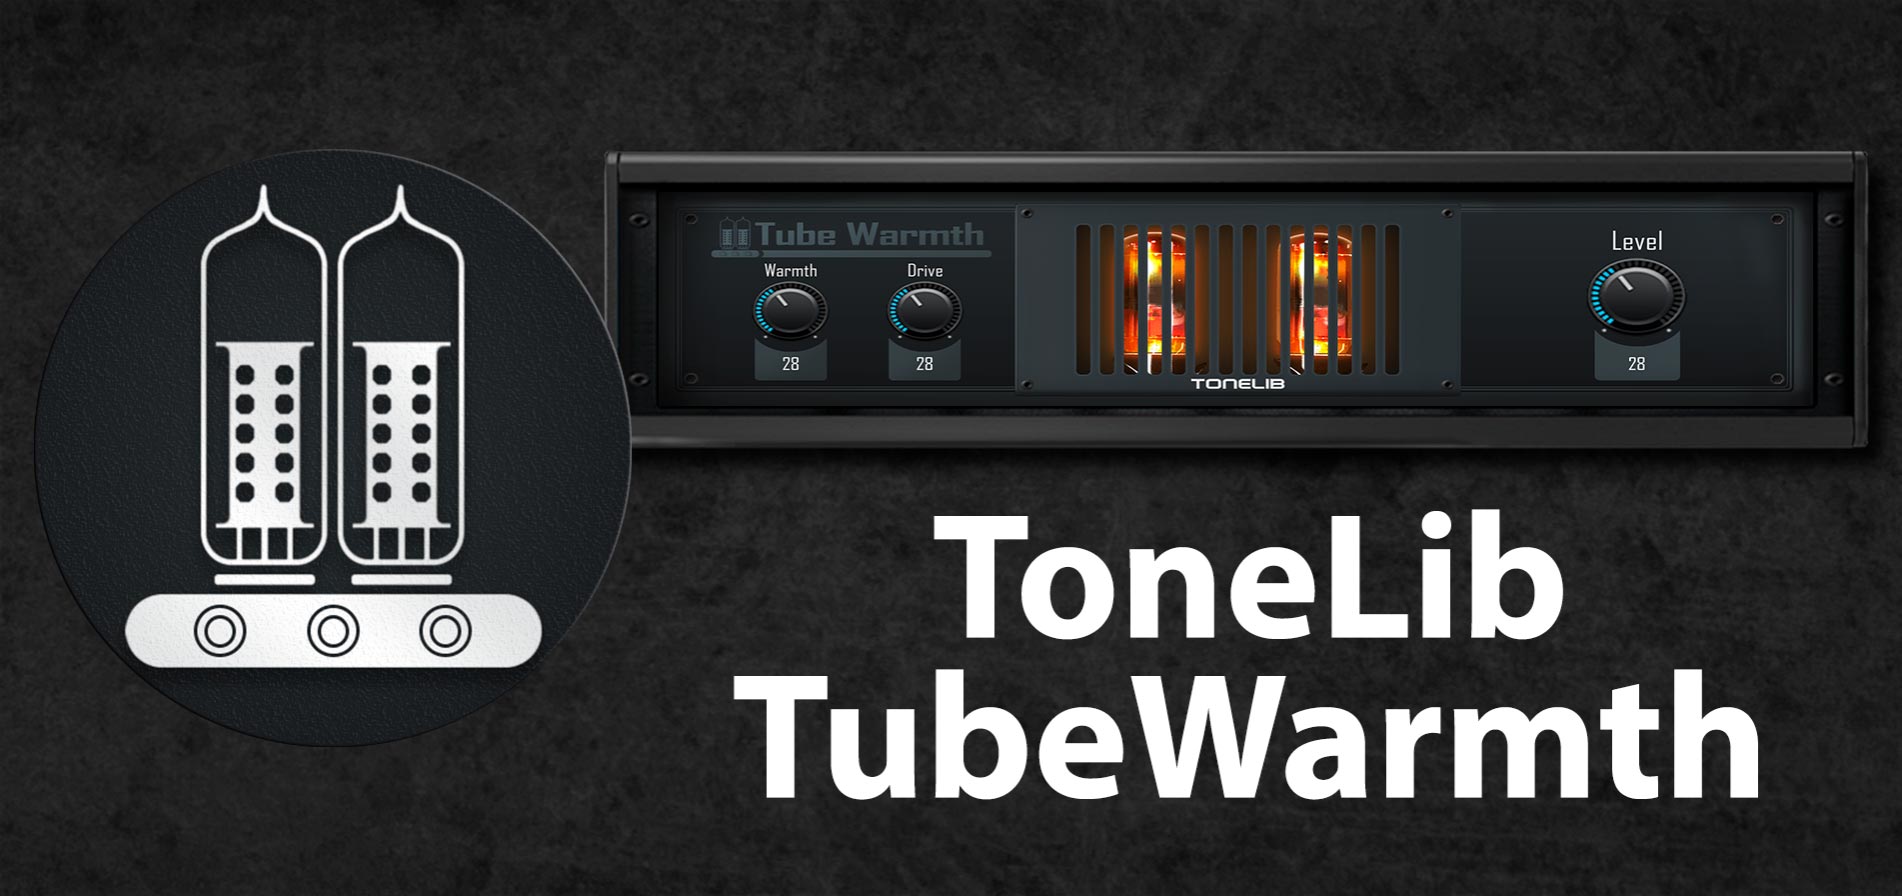 ToneLib TubeWarmth - Thumbnail with icon and rack-styled version of TL TubeWarmth interface.